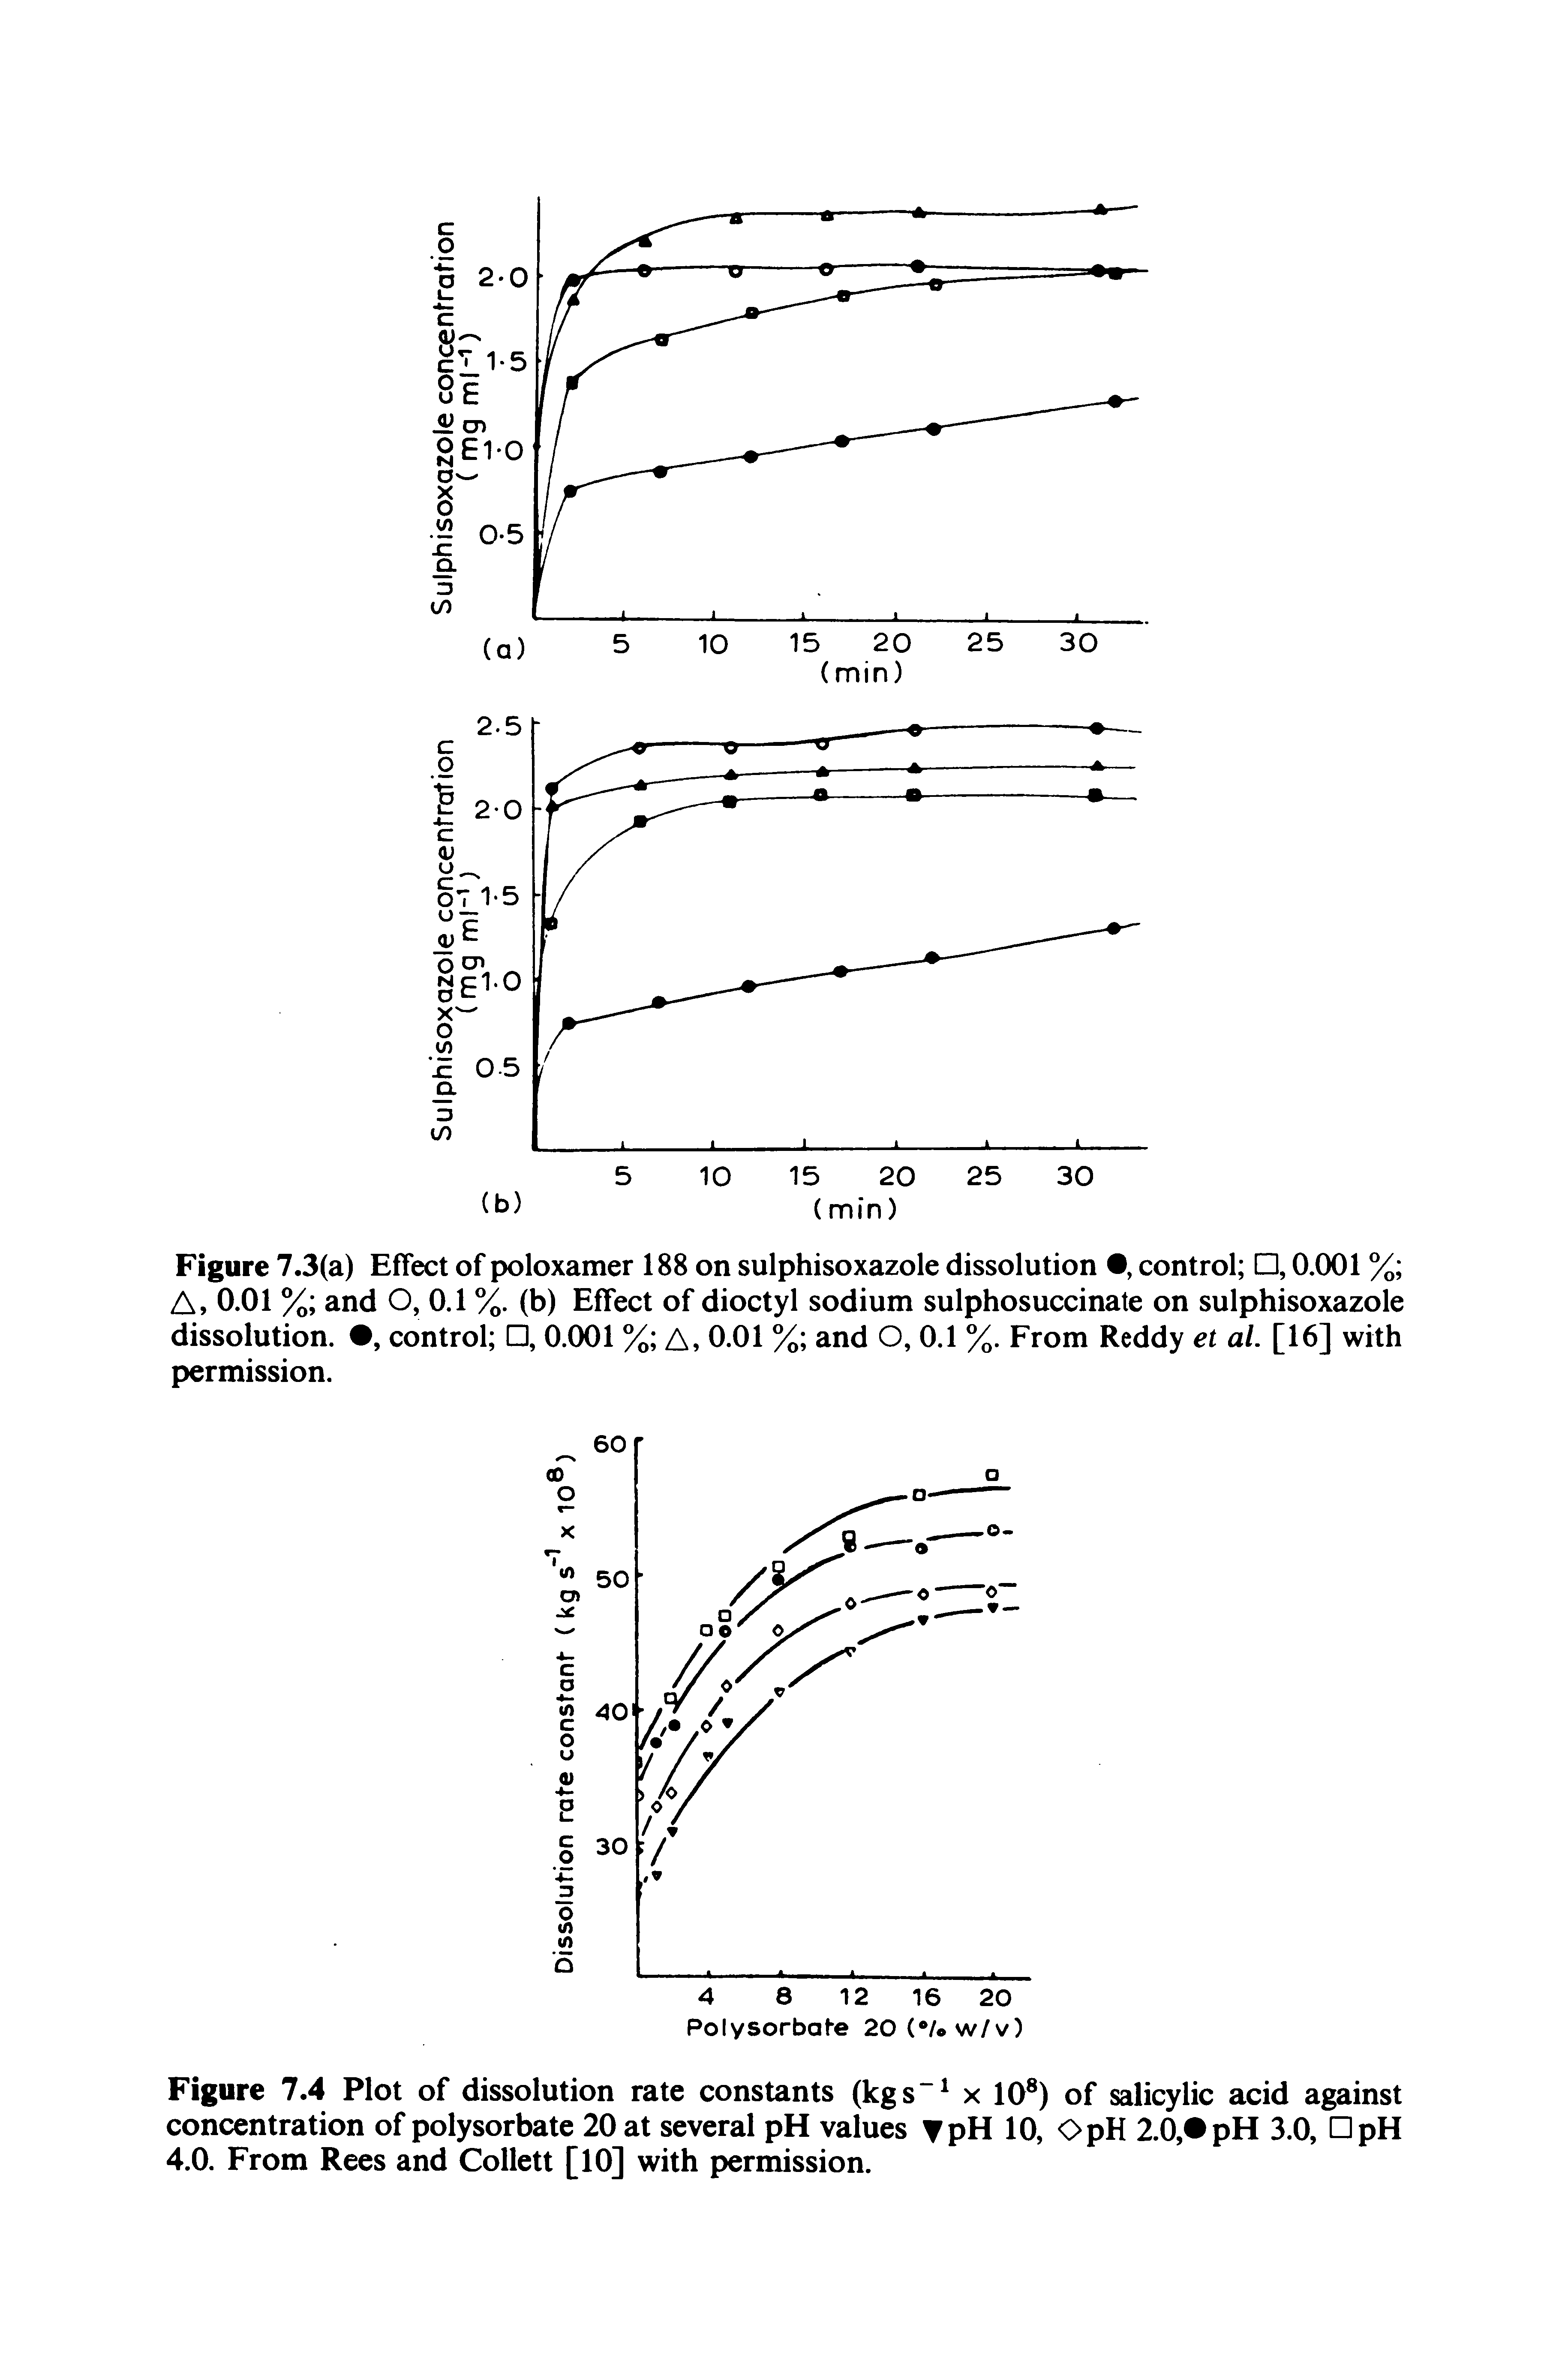 Figure 7.4 Plot of dissolution rate constants (kgs x 10 ) of salicylic acid against concentration of polysorbate 20 at several pH values JpH 10, OpH 2.0, pH 3.0, DpH 4.0. From Rees and Collett [10] with permission.